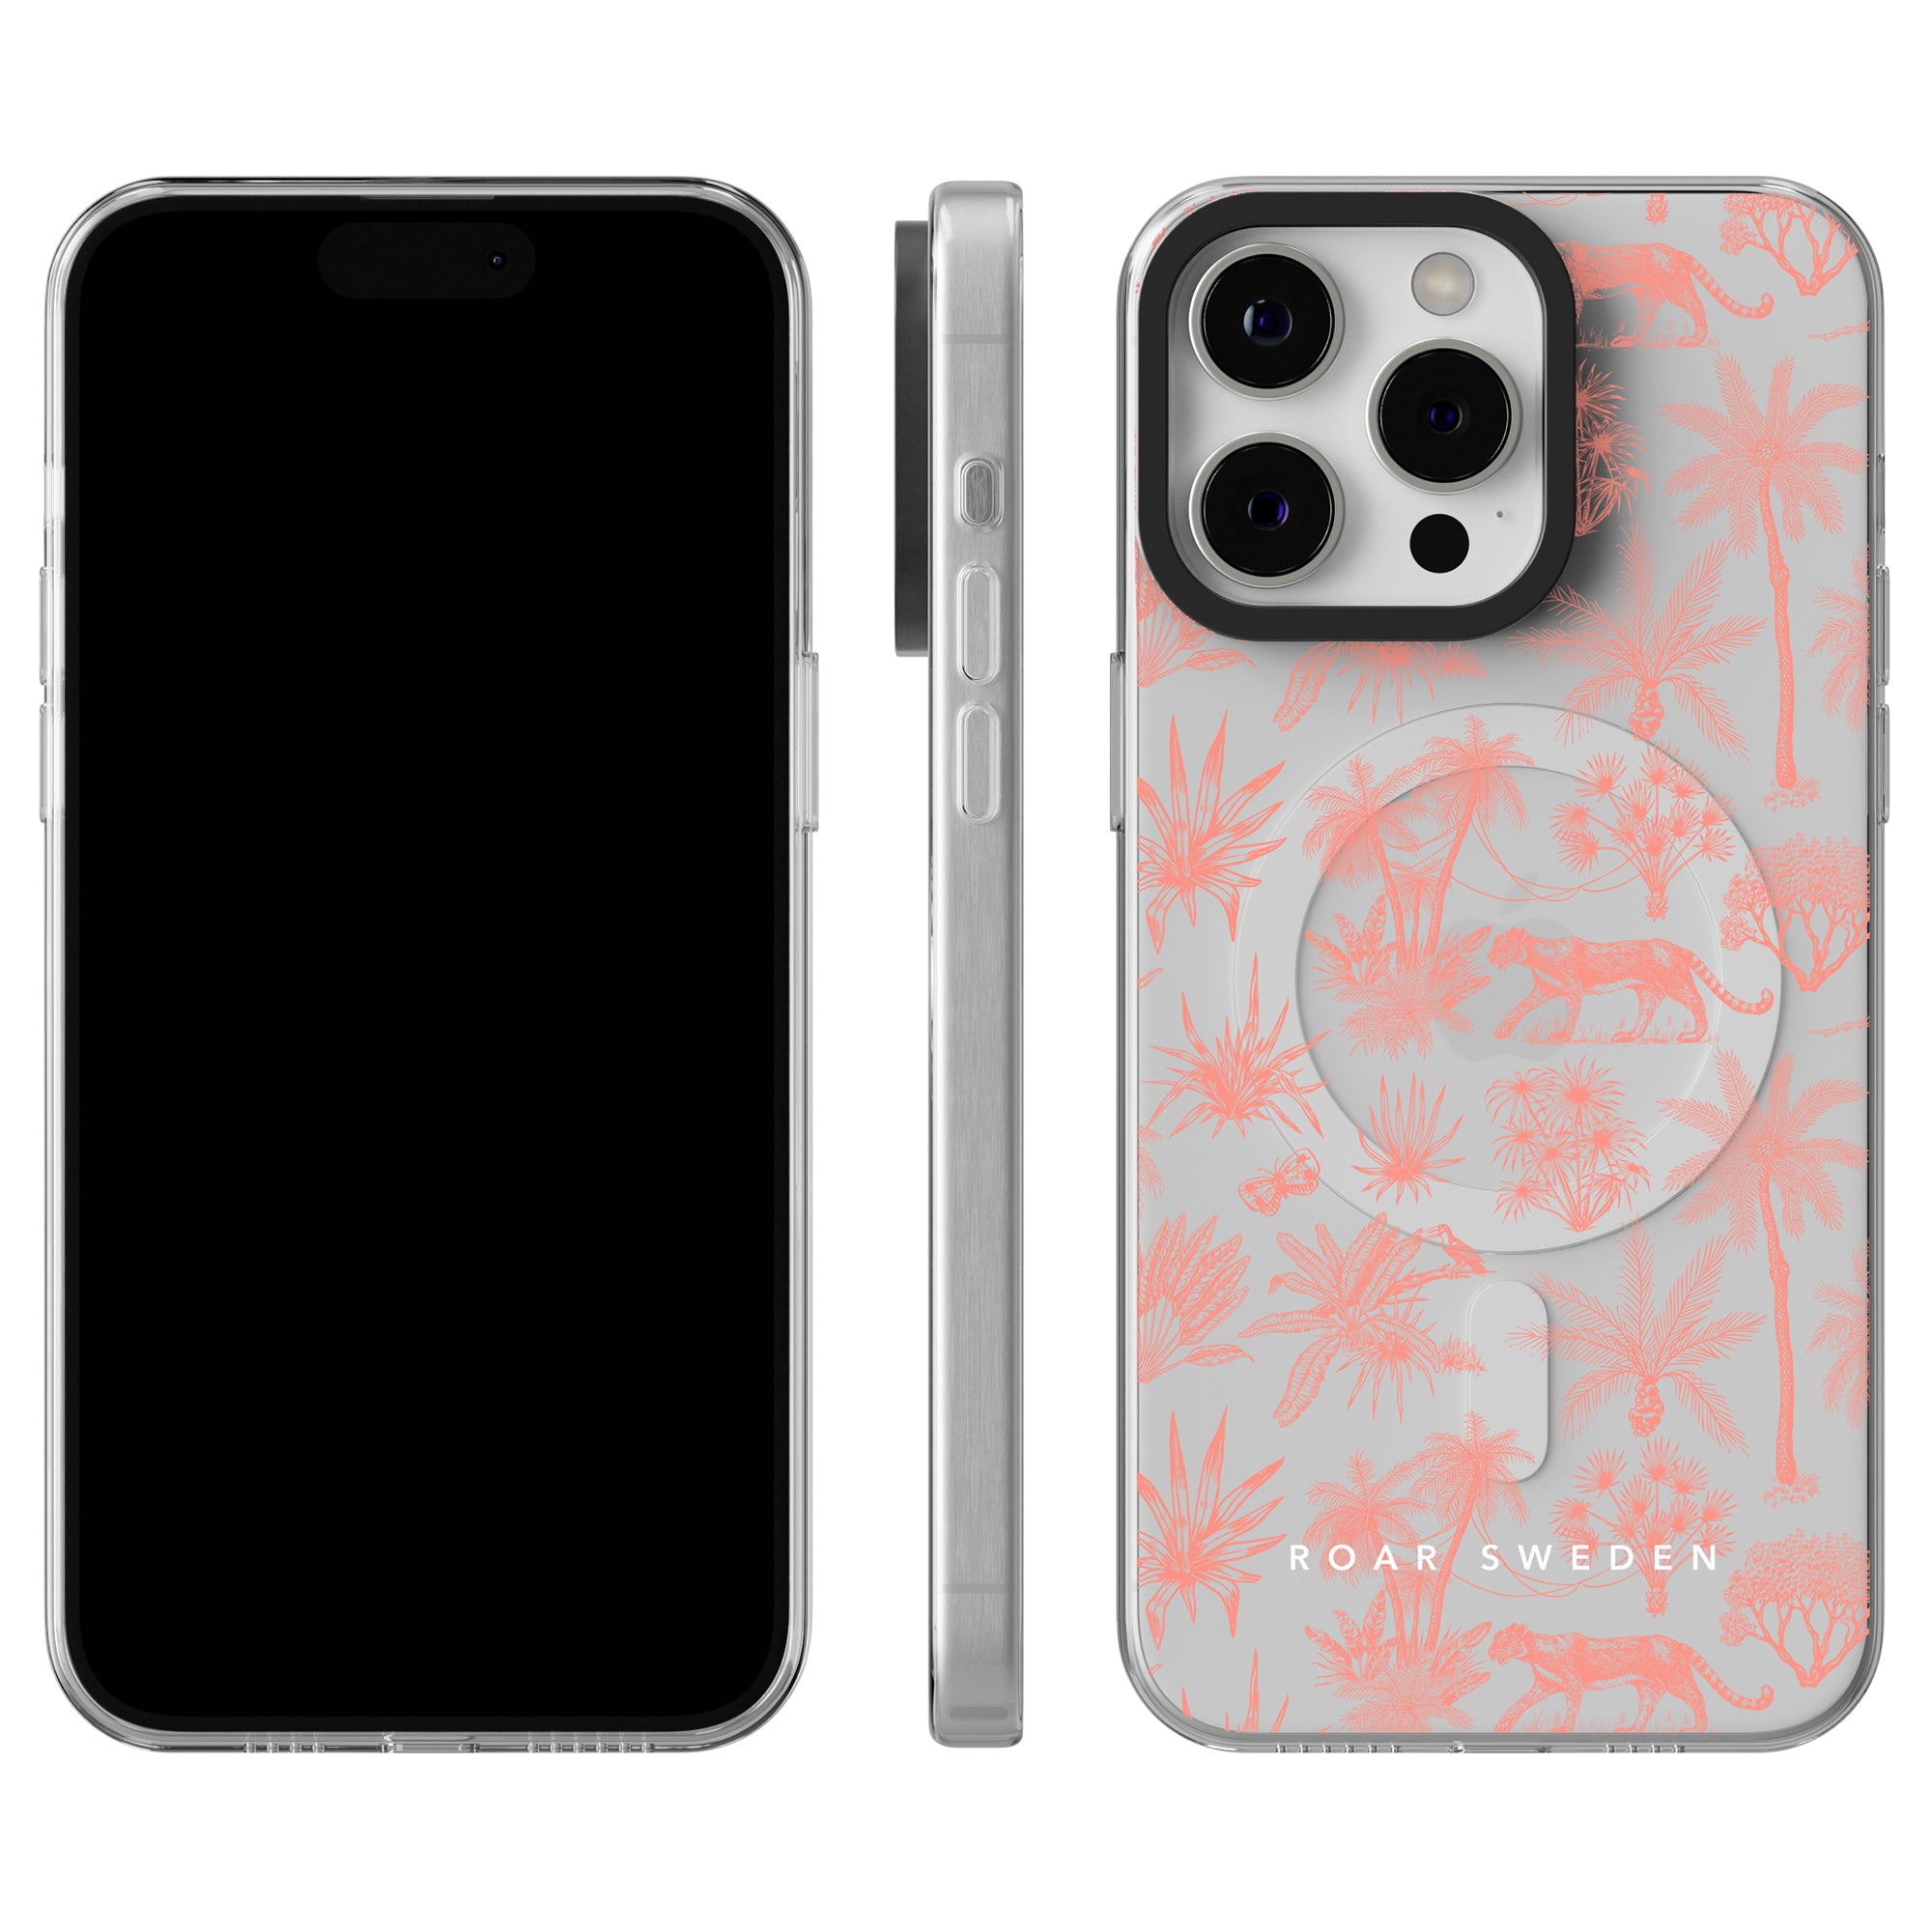 This image showcases a smartphone from multiple angles—front, side, and back. The back flaunts a tropical Toile De Jouy Coral - MagSafe design with palm trees, animals, and the "ROAR SWEDEN" text. The phone also features a triple-lens camera setup and is encased in a MagSafe Case for added protection.